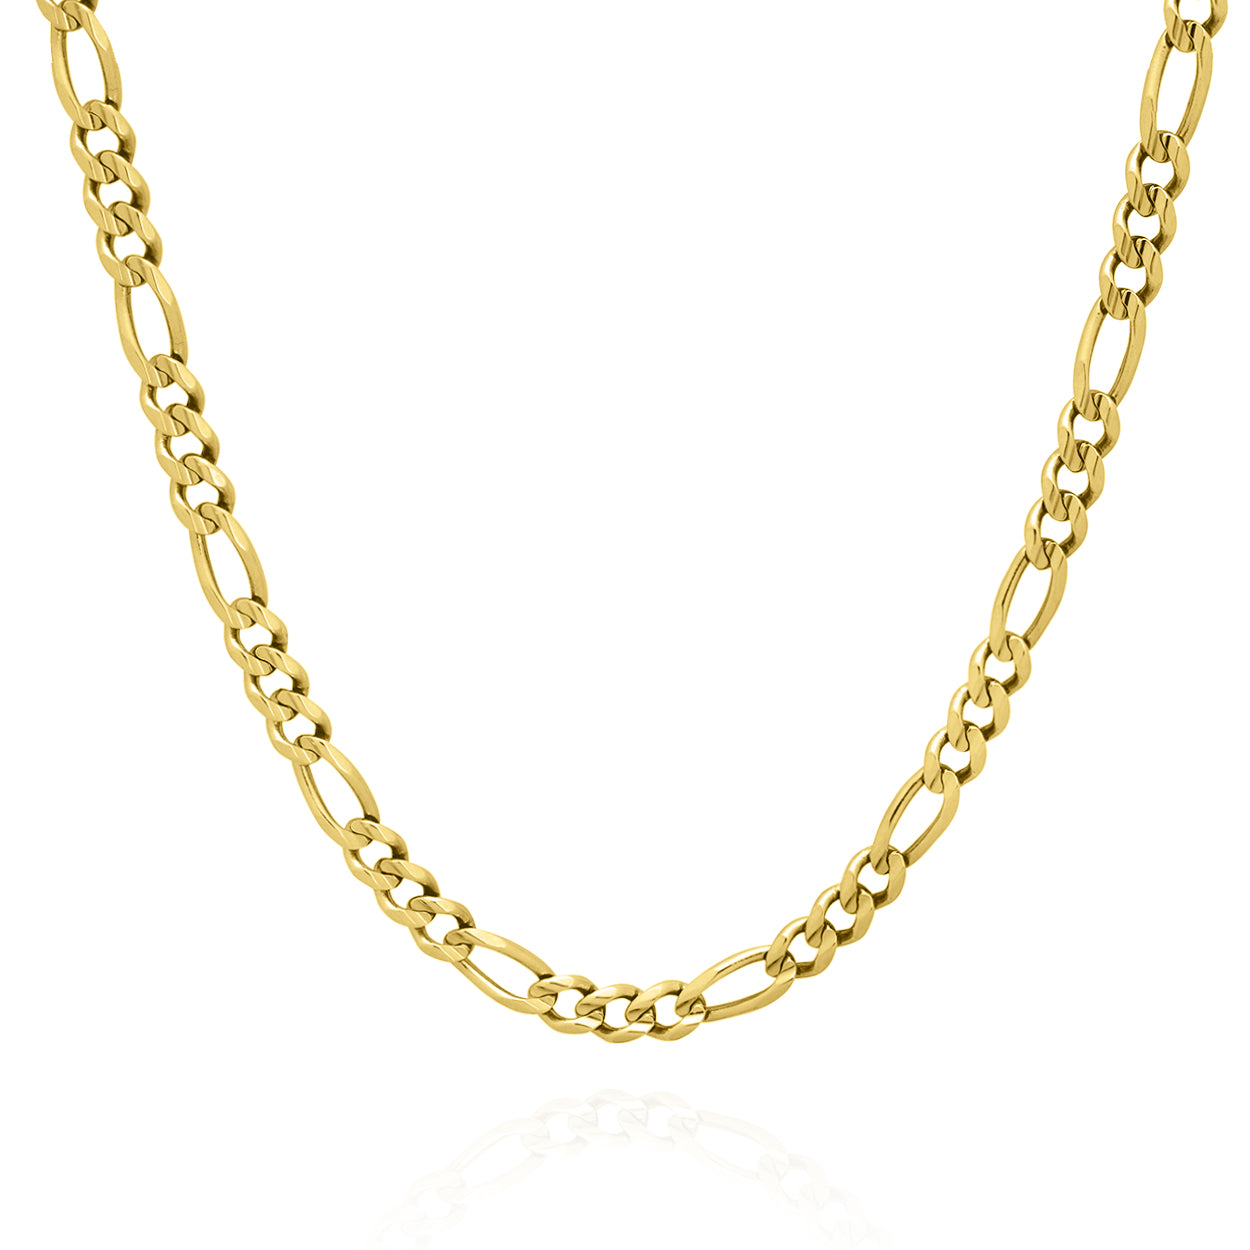 4mm Wide Figaro Style Chain Solid Gold Yellow